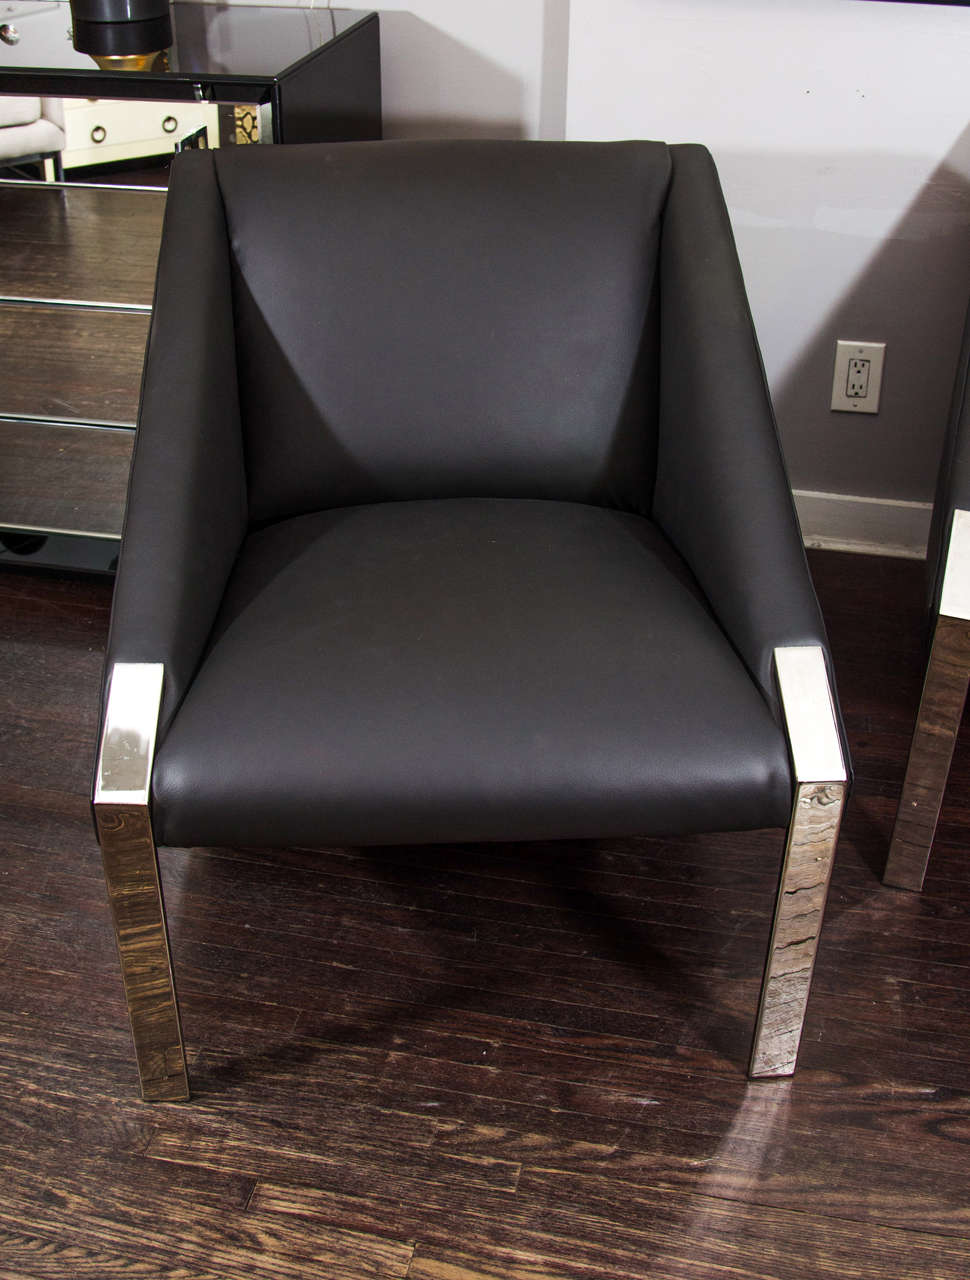 Pair of Andree Putman Chairs with Chrome Detail upholstered in Charcoal Leather